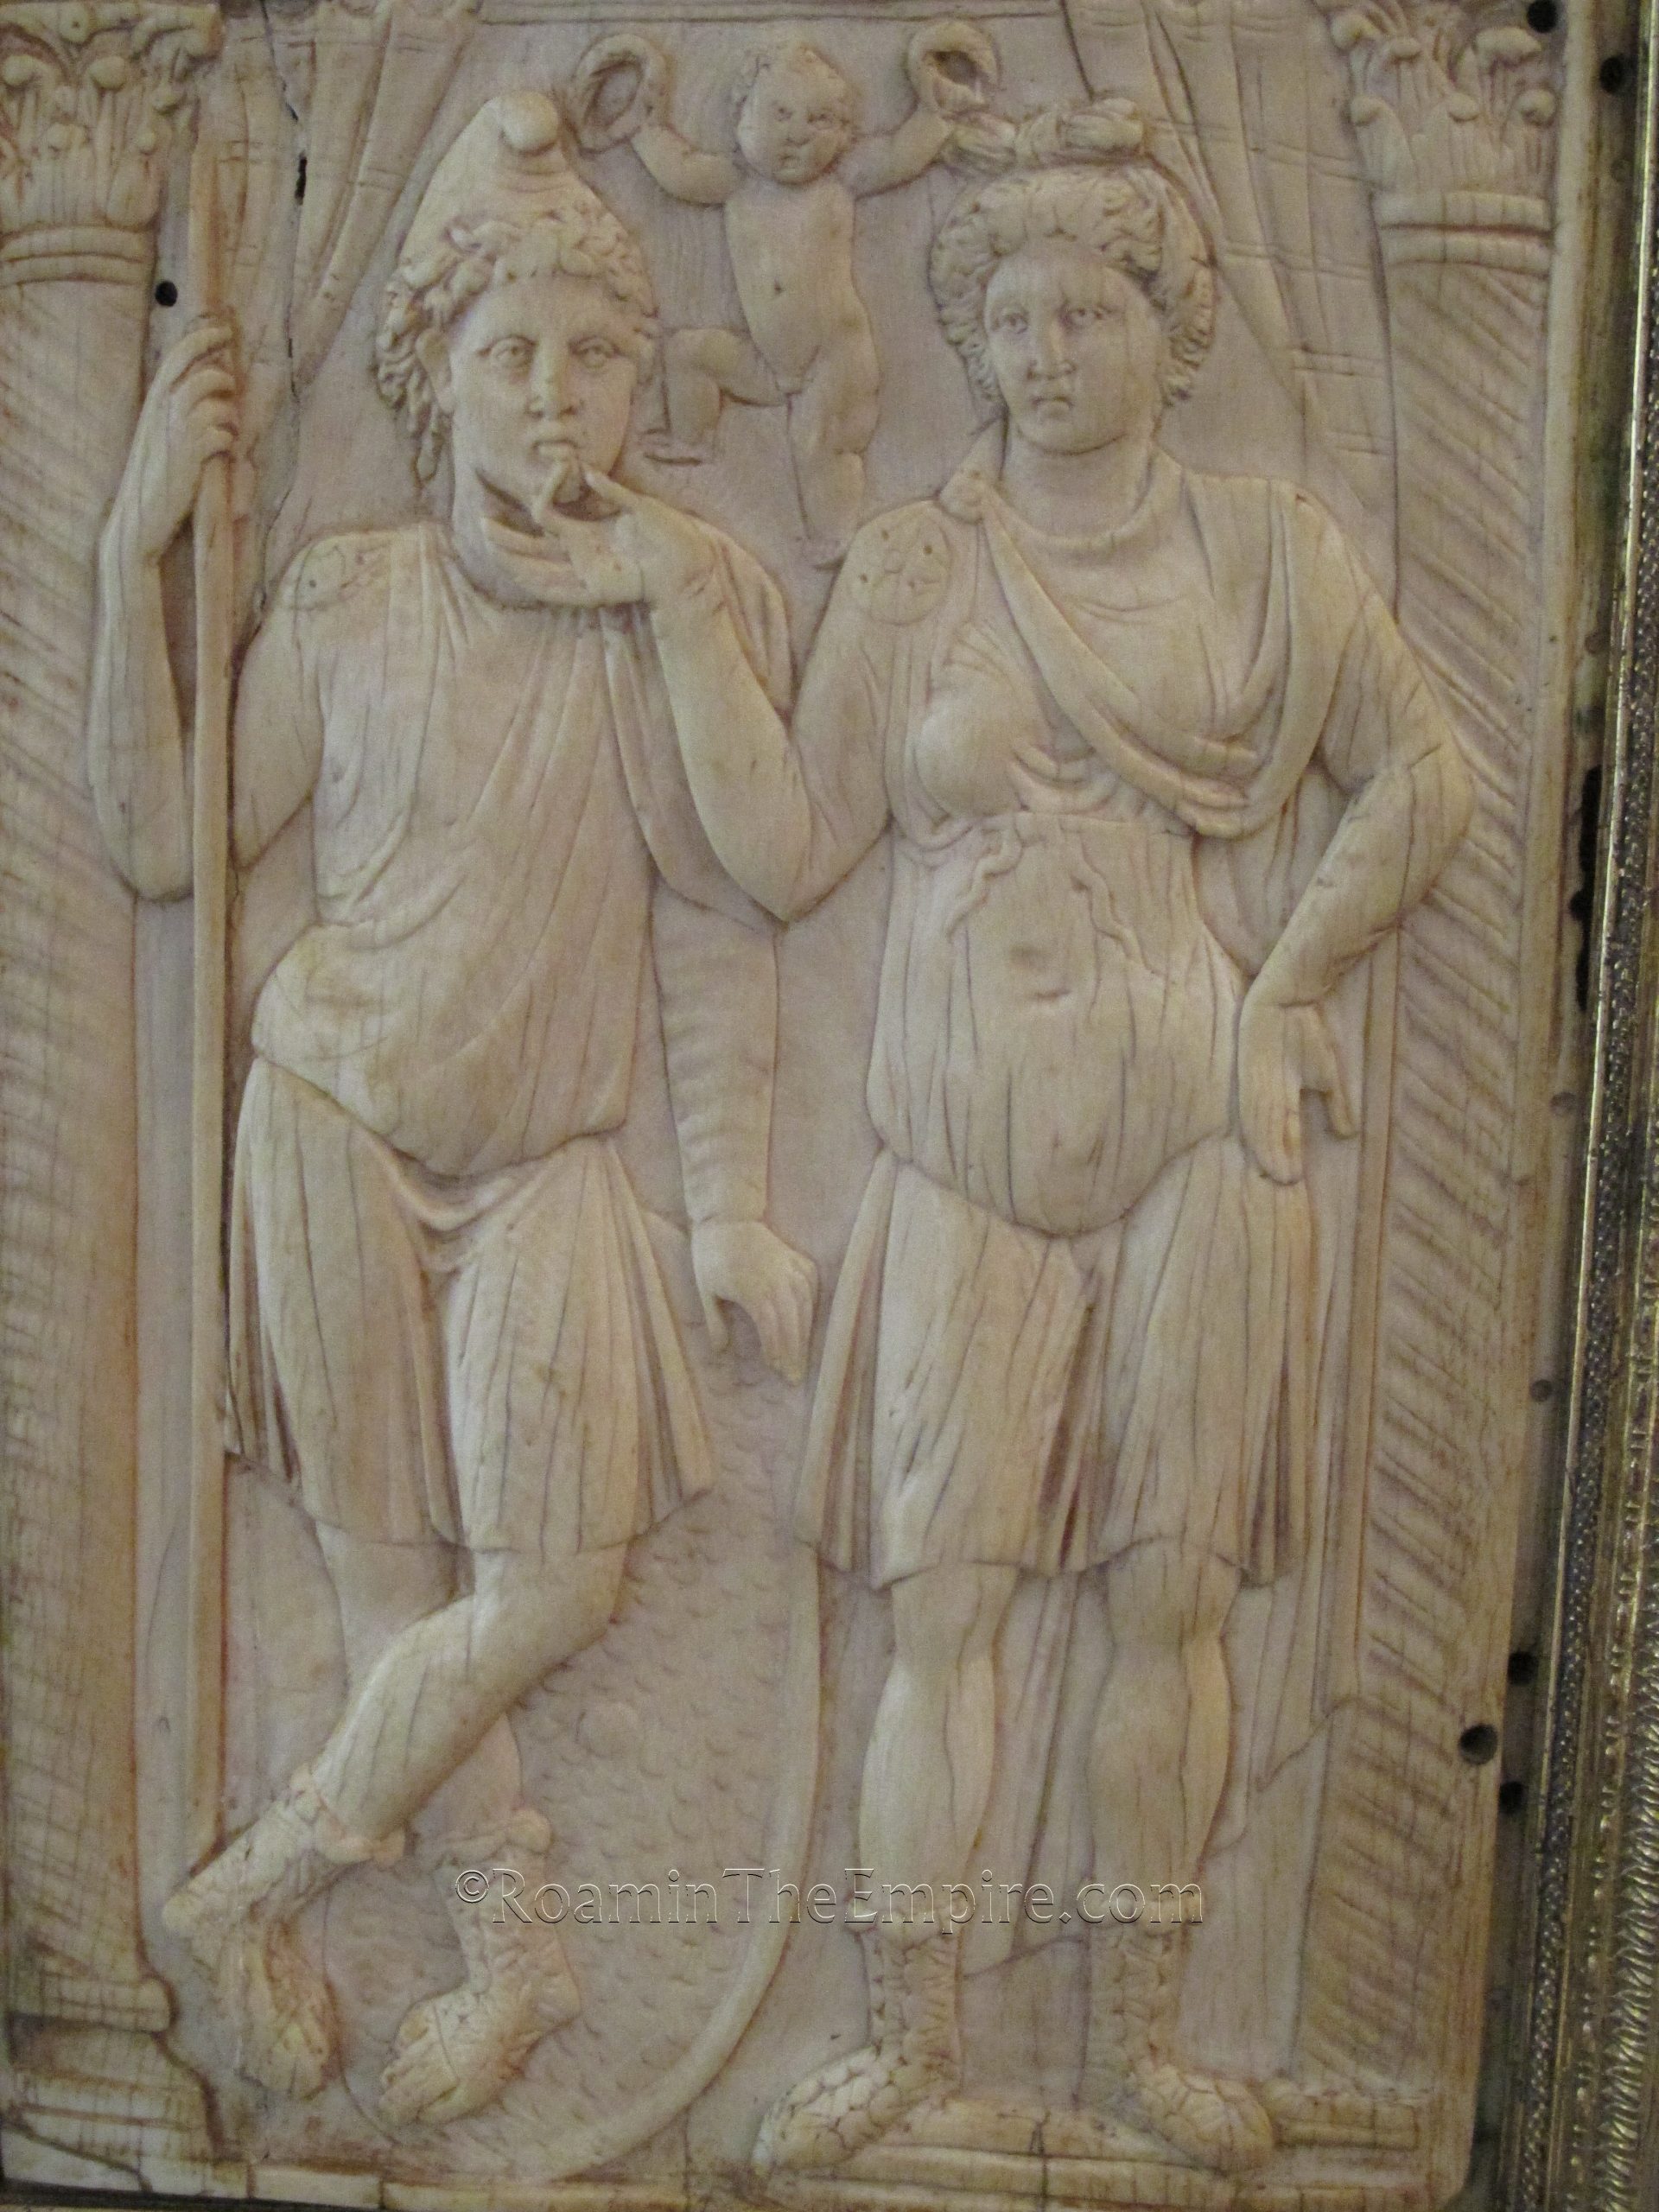 Detail of a 5th century CE ivory carving, probably of Endymion and Selene. Set in a bronze reliquary in the 15th century. Museo di Santa Giulia.